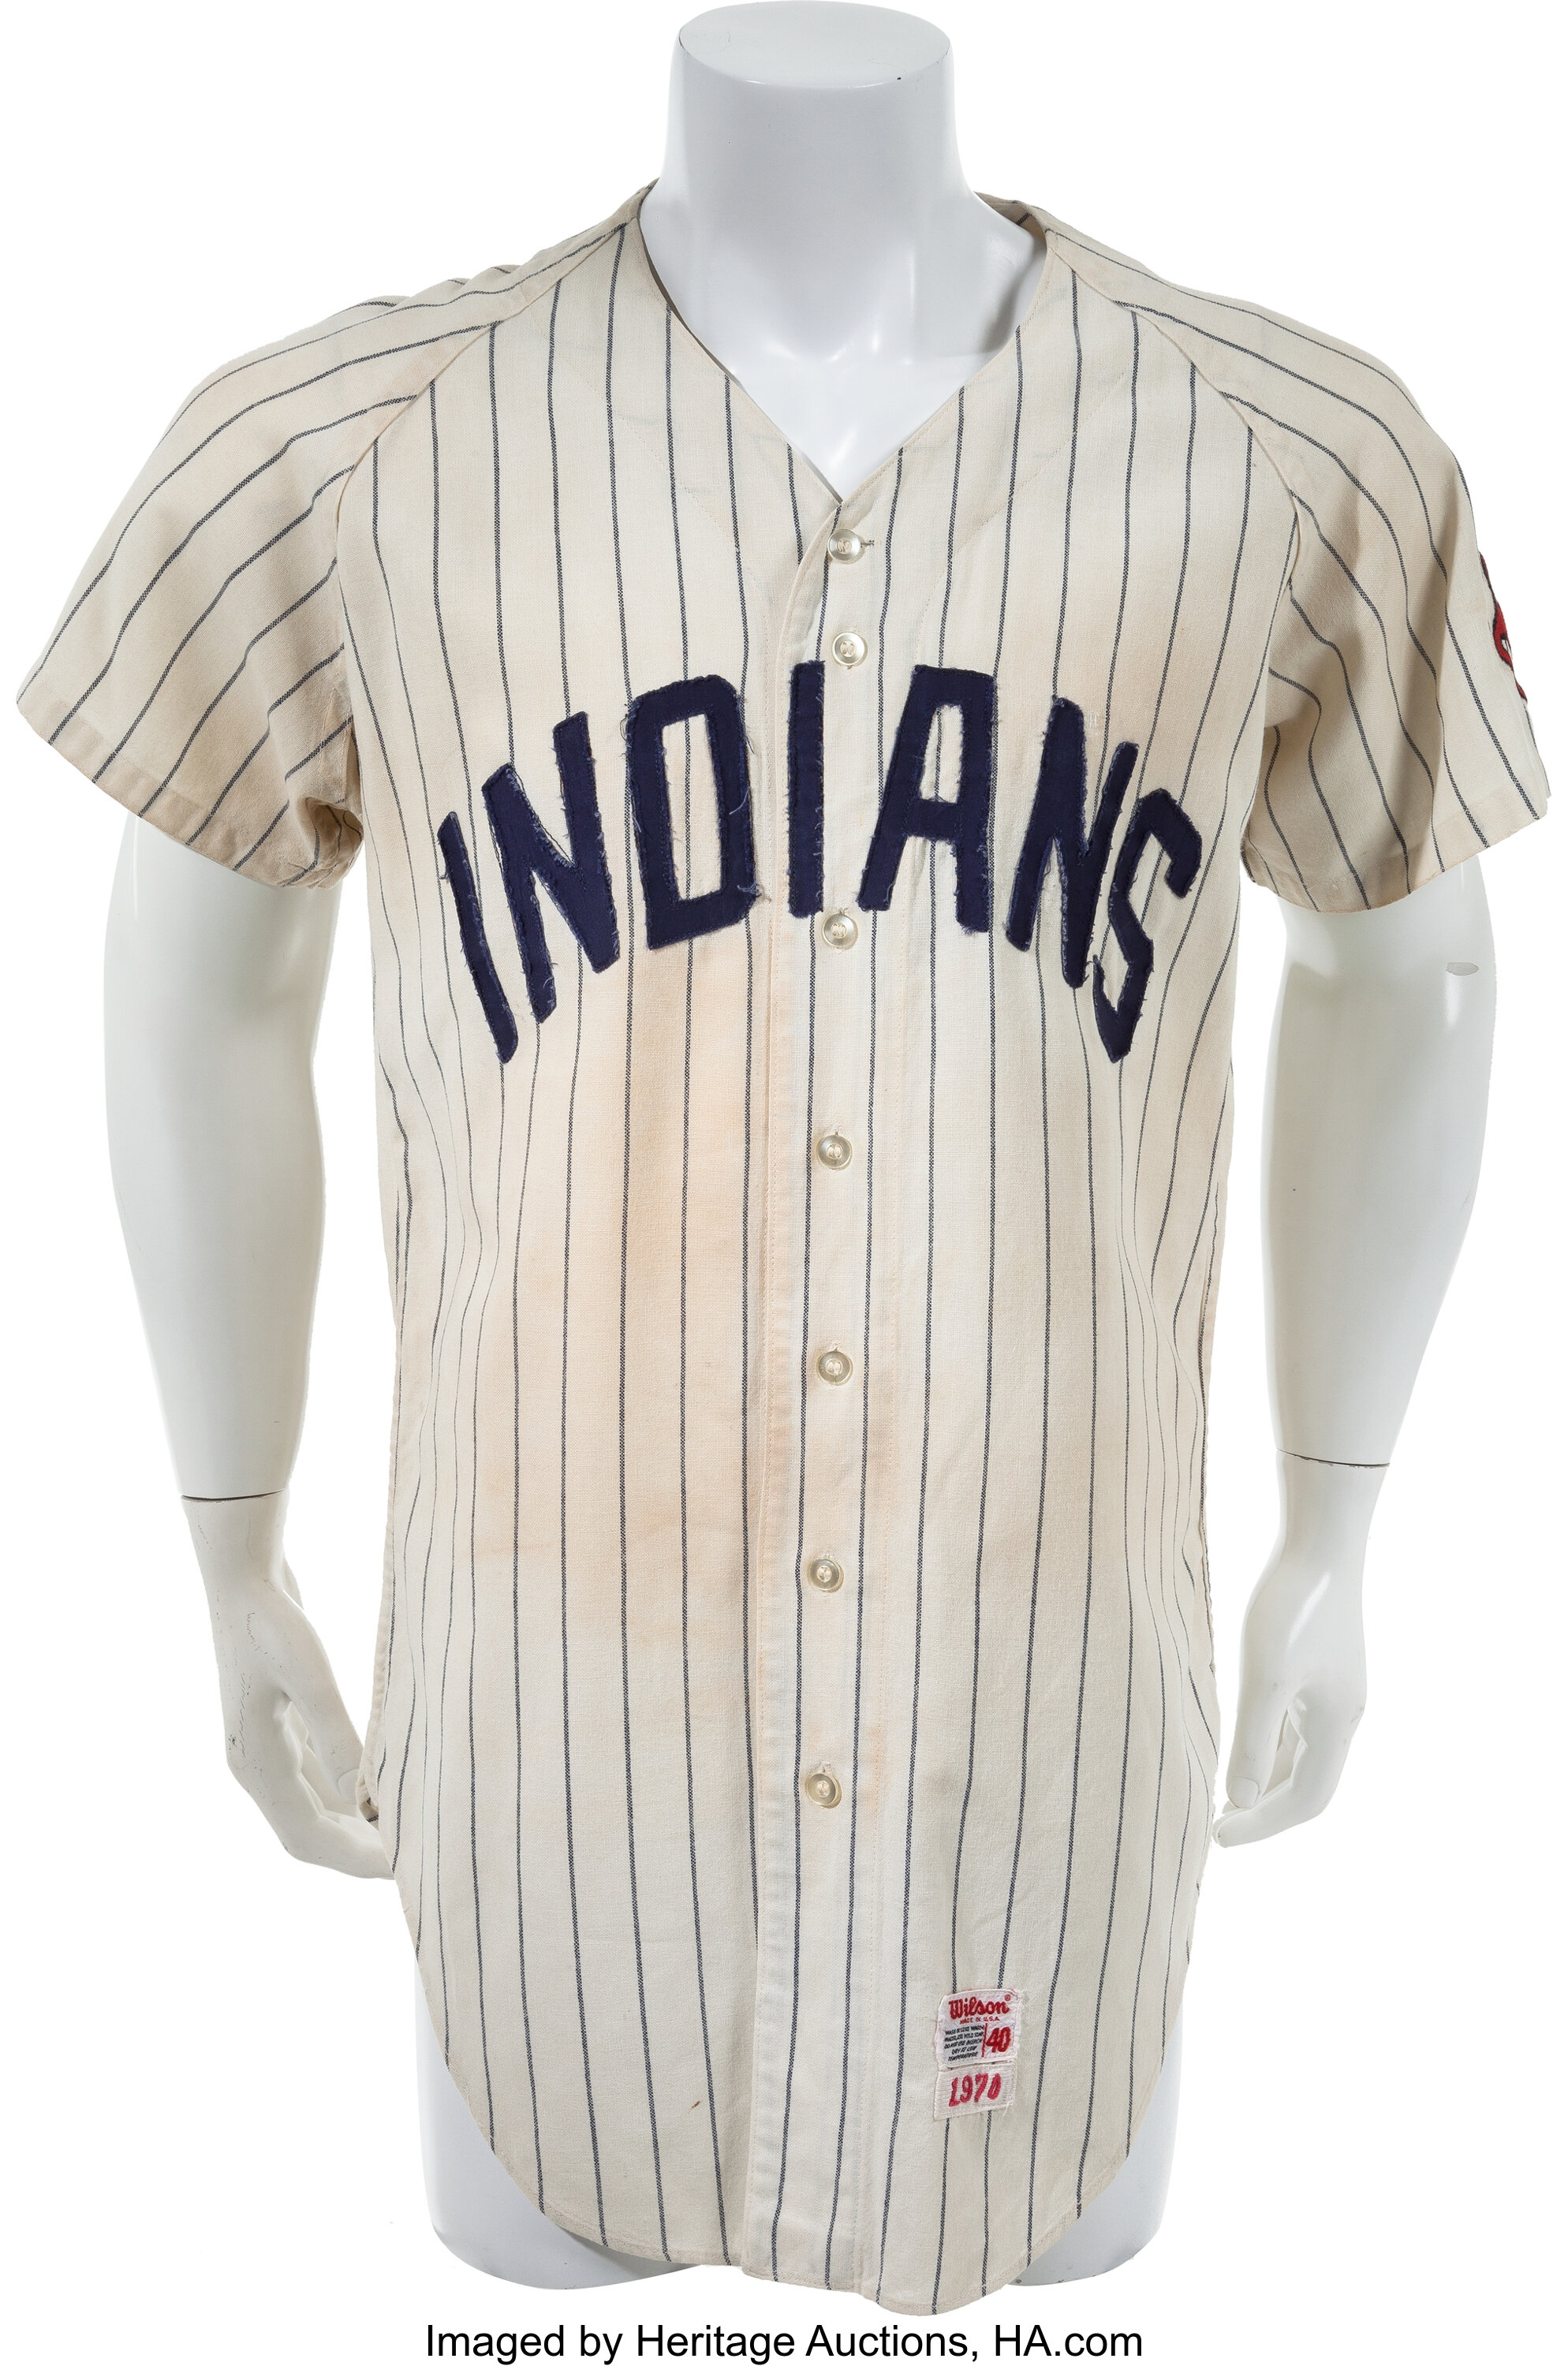 Indians wear road uniforms with 'Cleveland' on the chest on